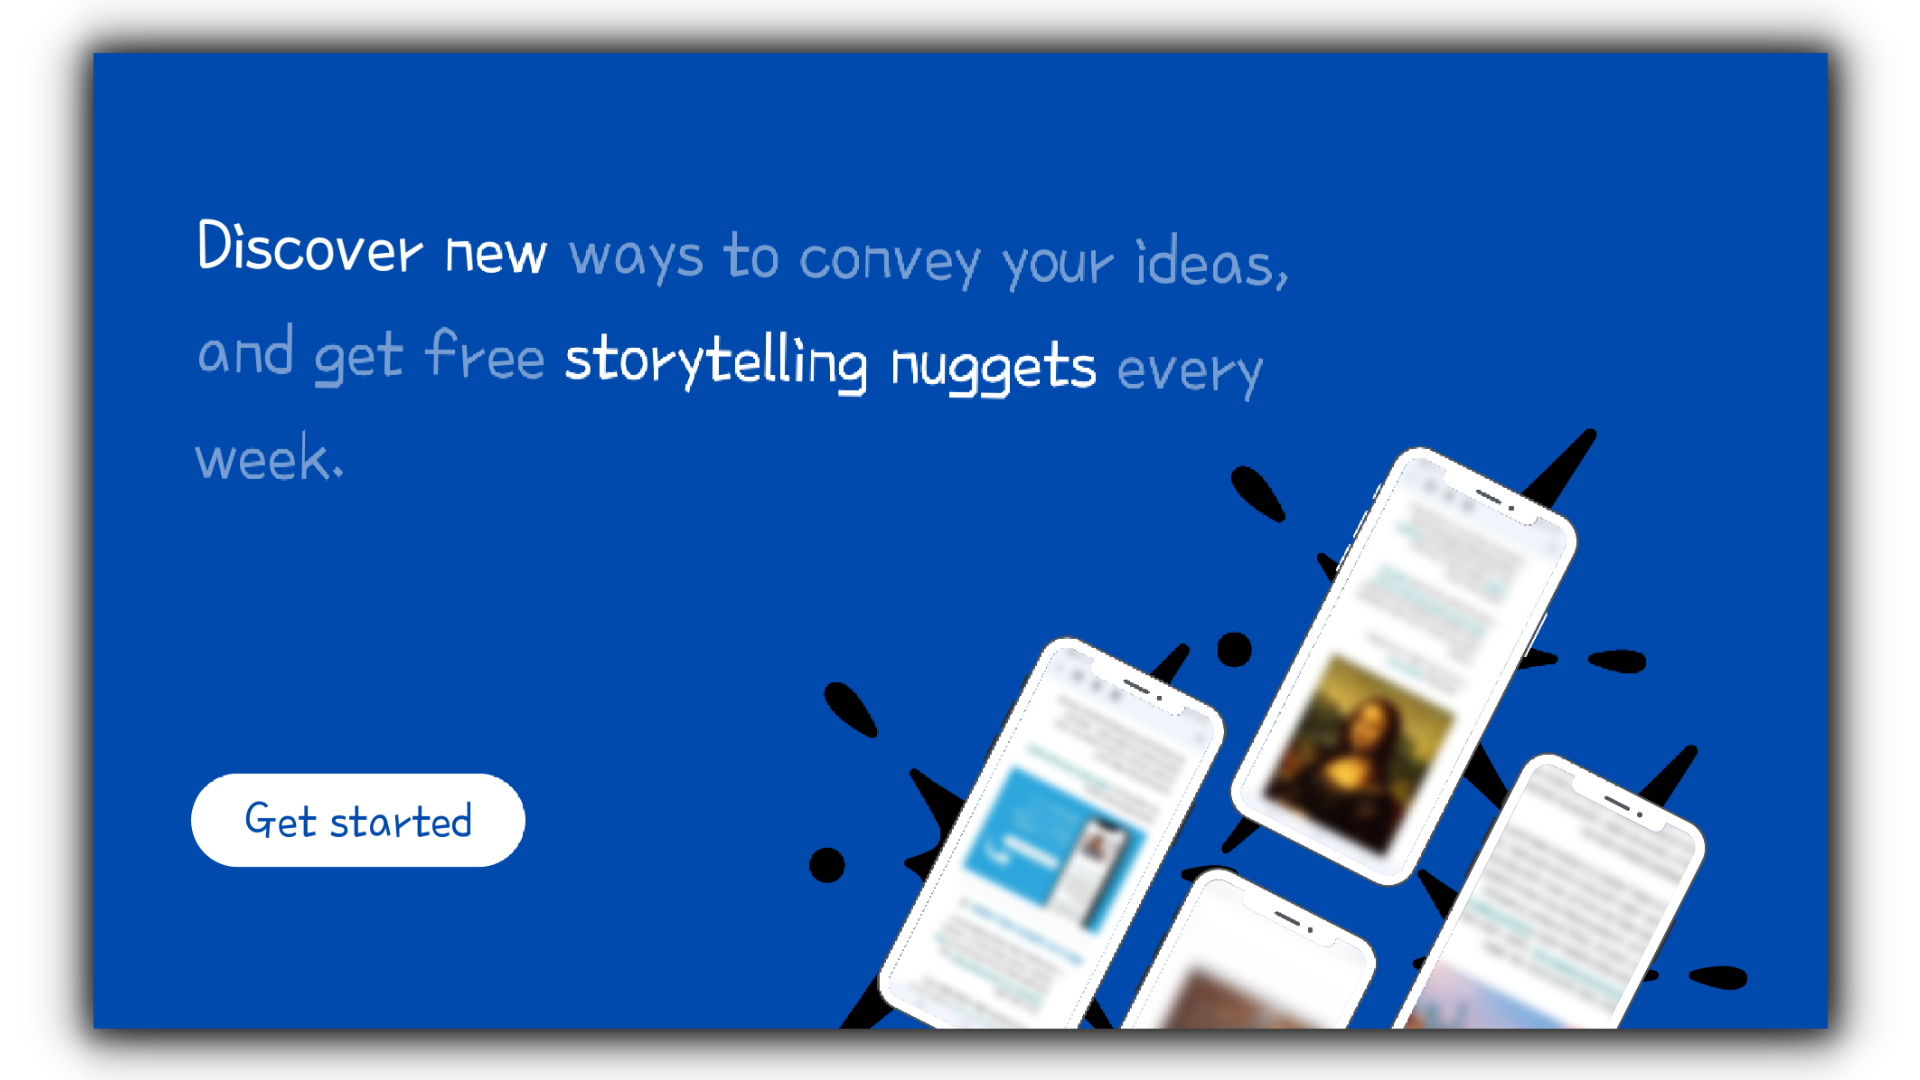 A newsletter about storytelling